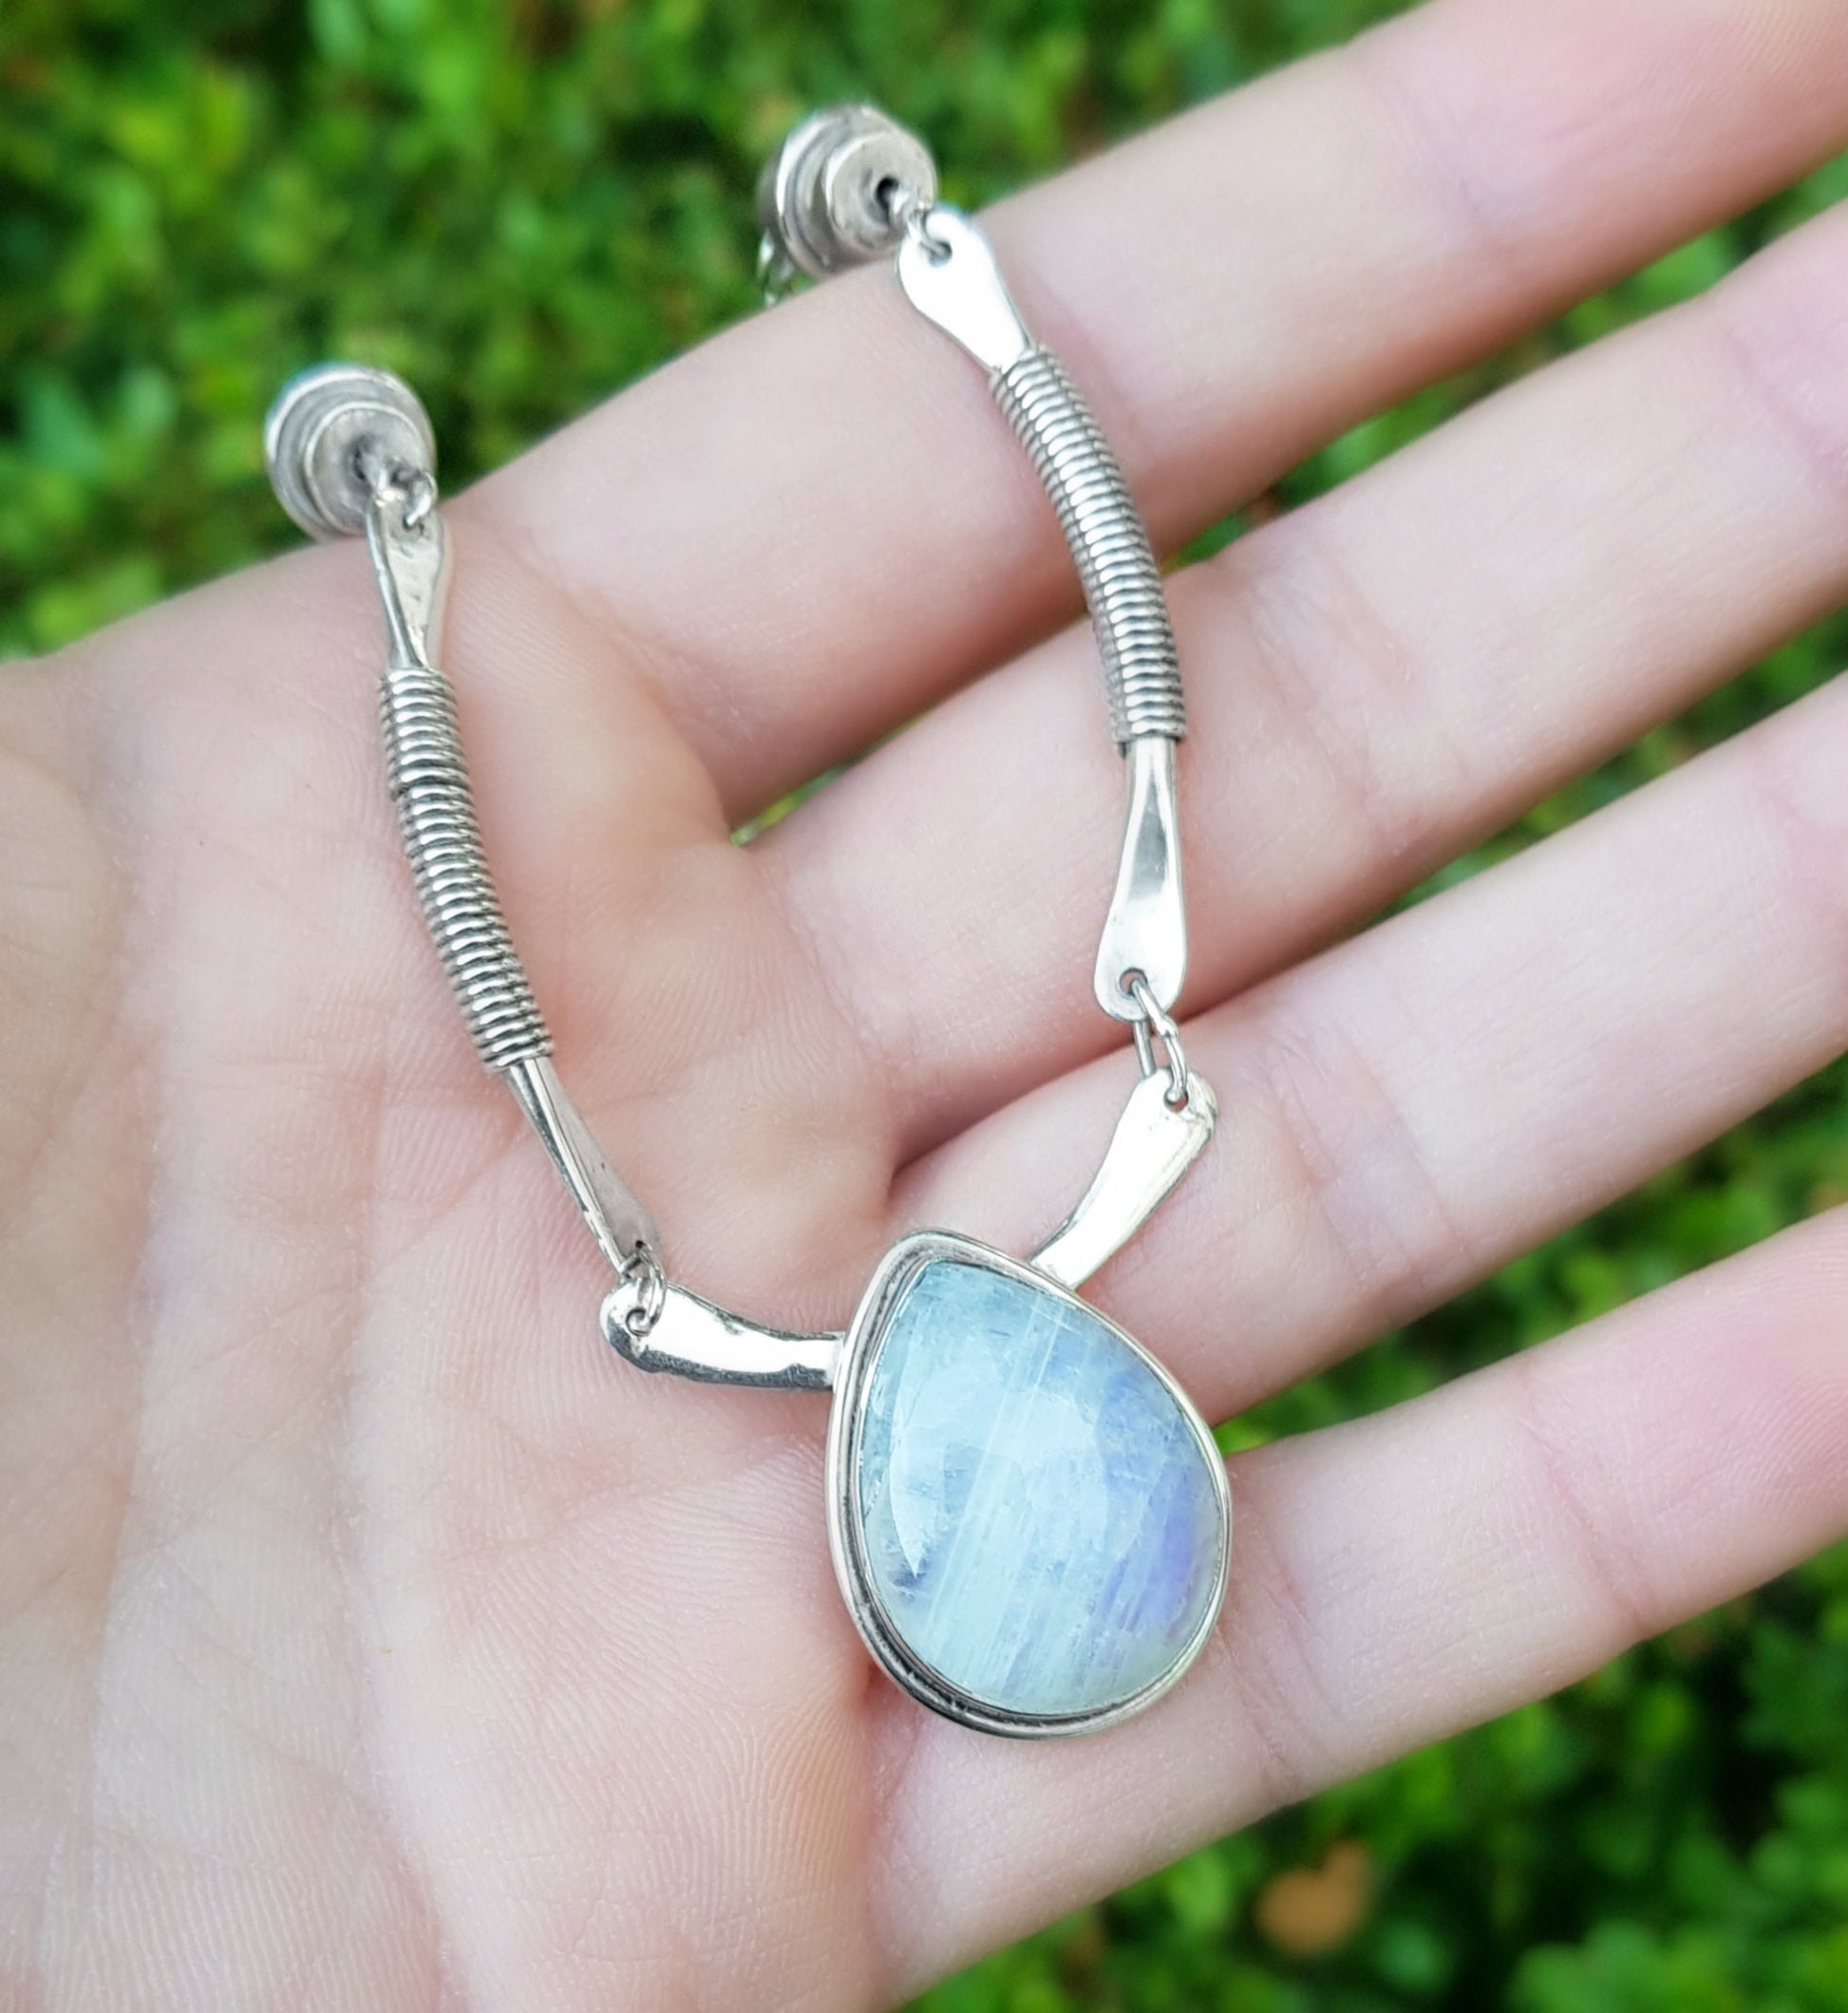 Rainbow Moonstone Necklace In Sterling Silver With Adjustable Chain Bohemian Gemstone Necklace Unique Gift For Her One Of A Kind Jewellery